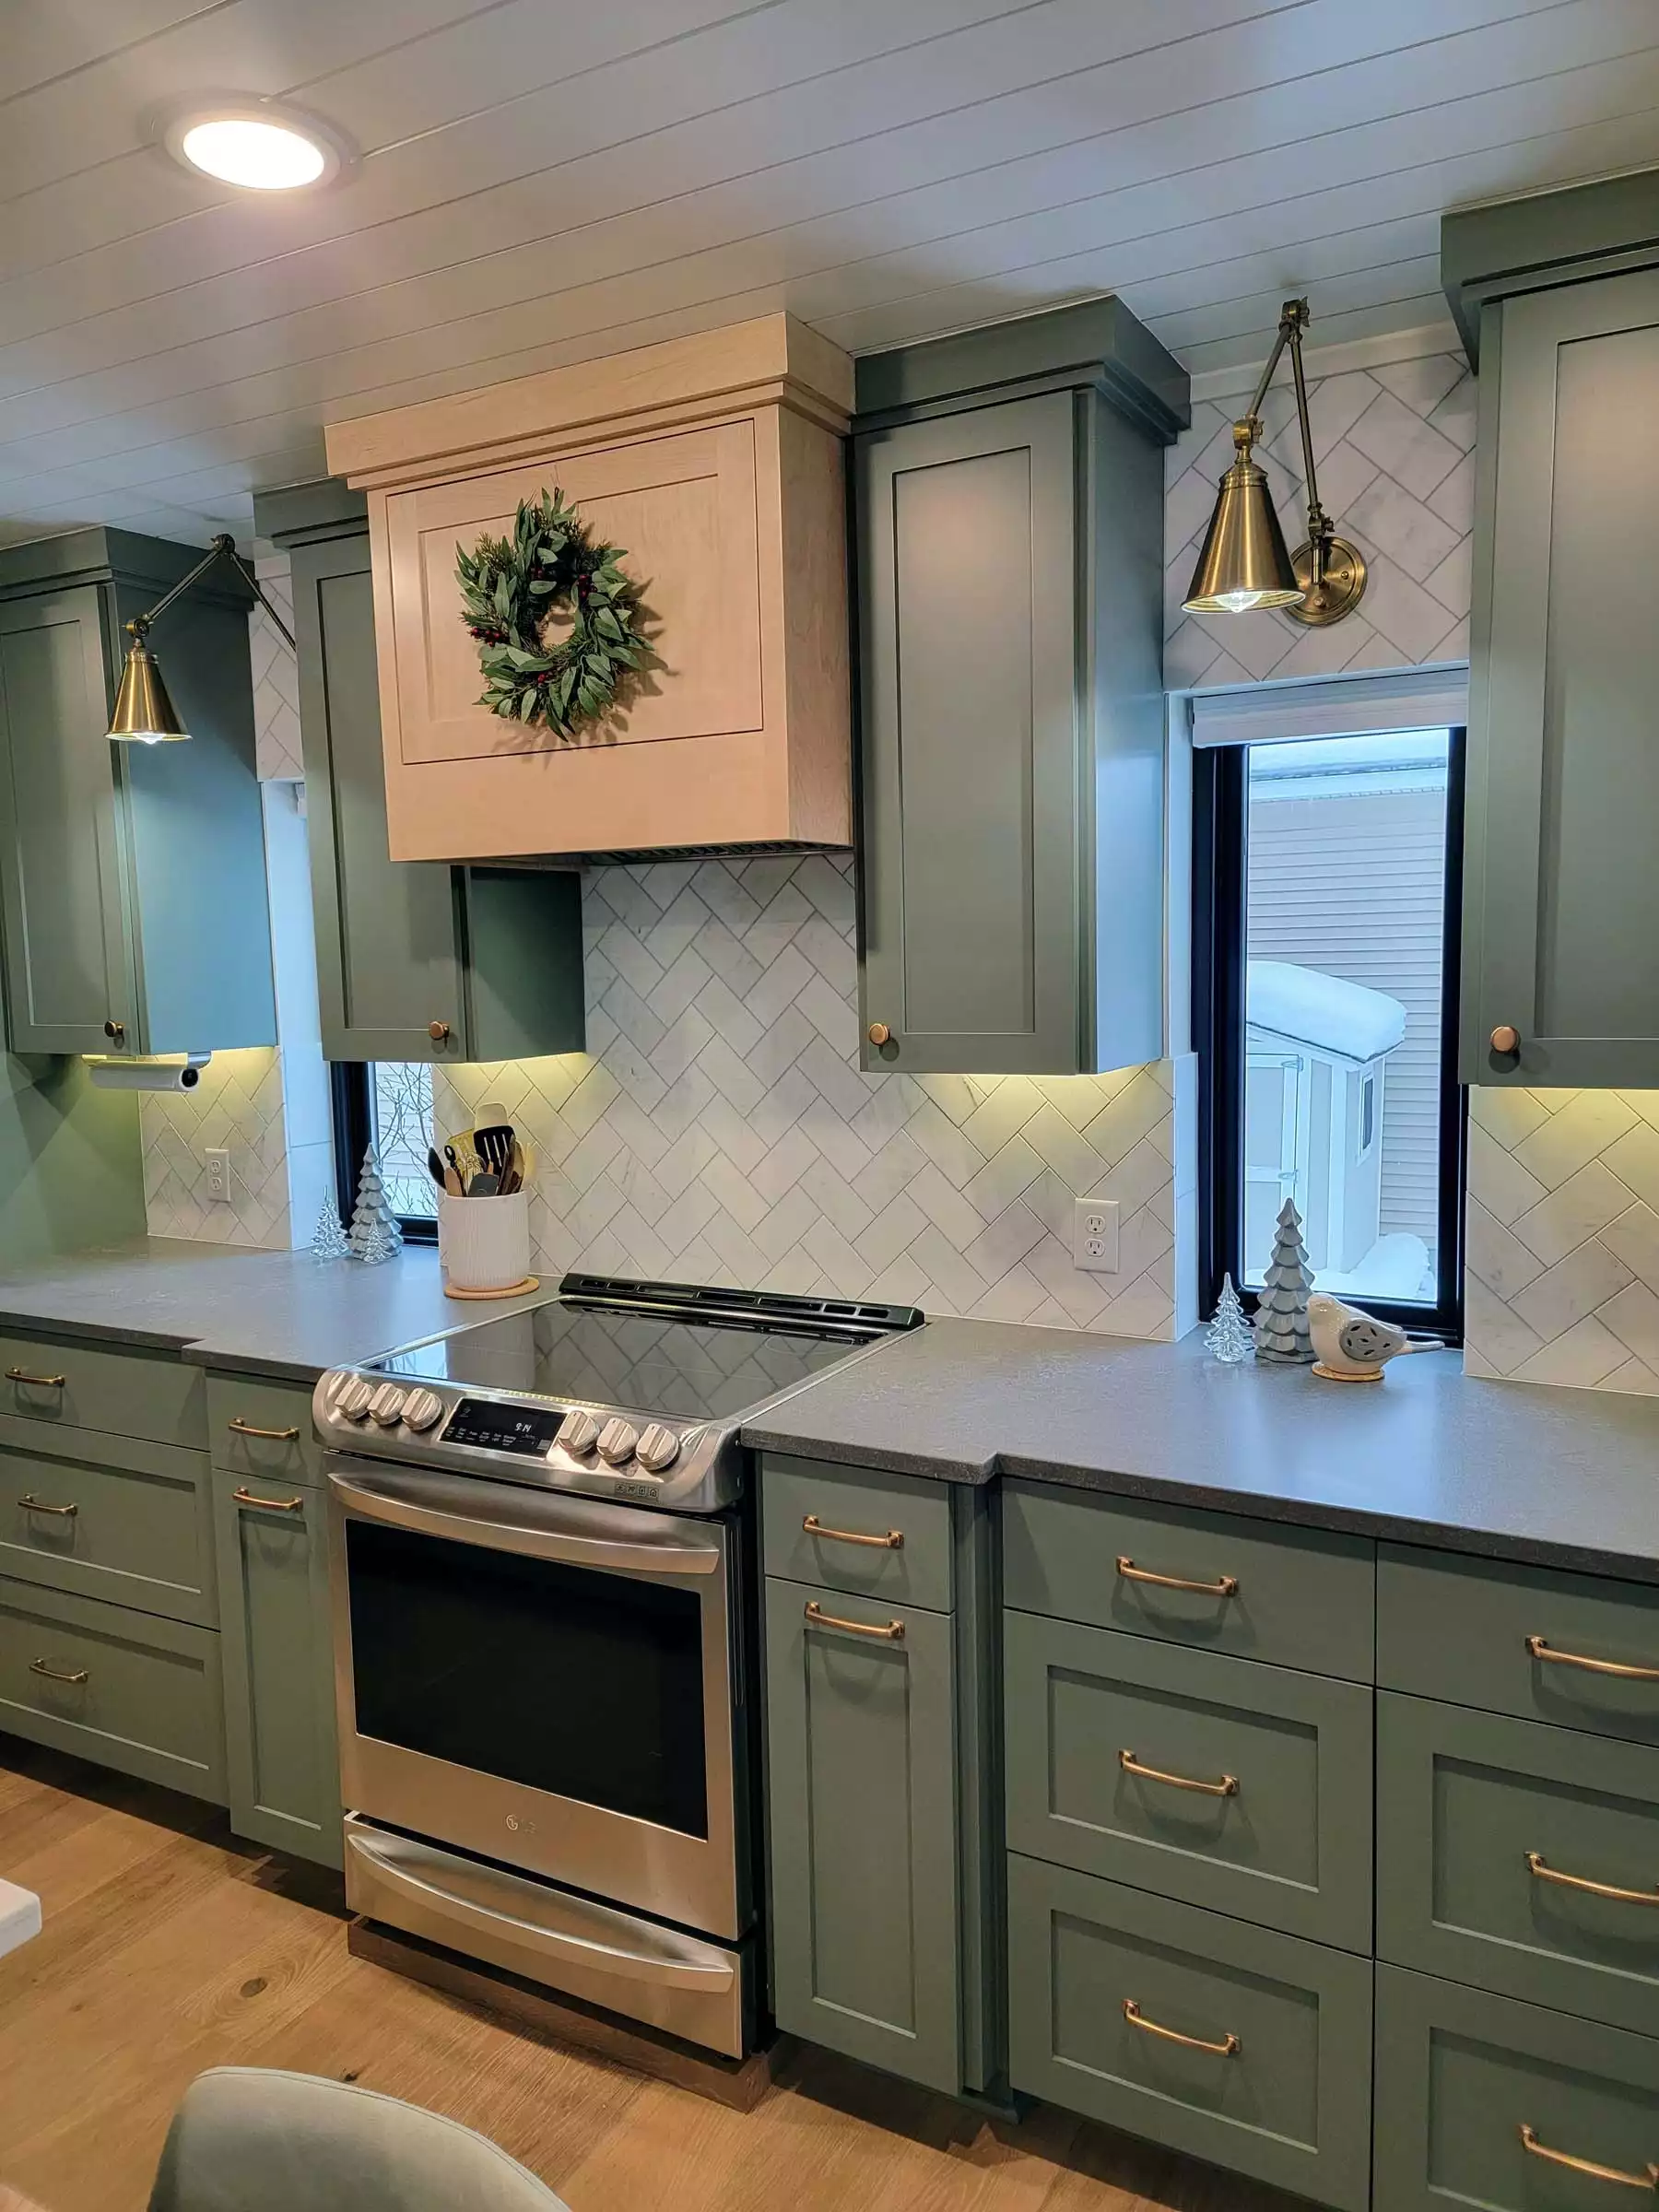 Custom Enameled Cabinets with Birch Accents